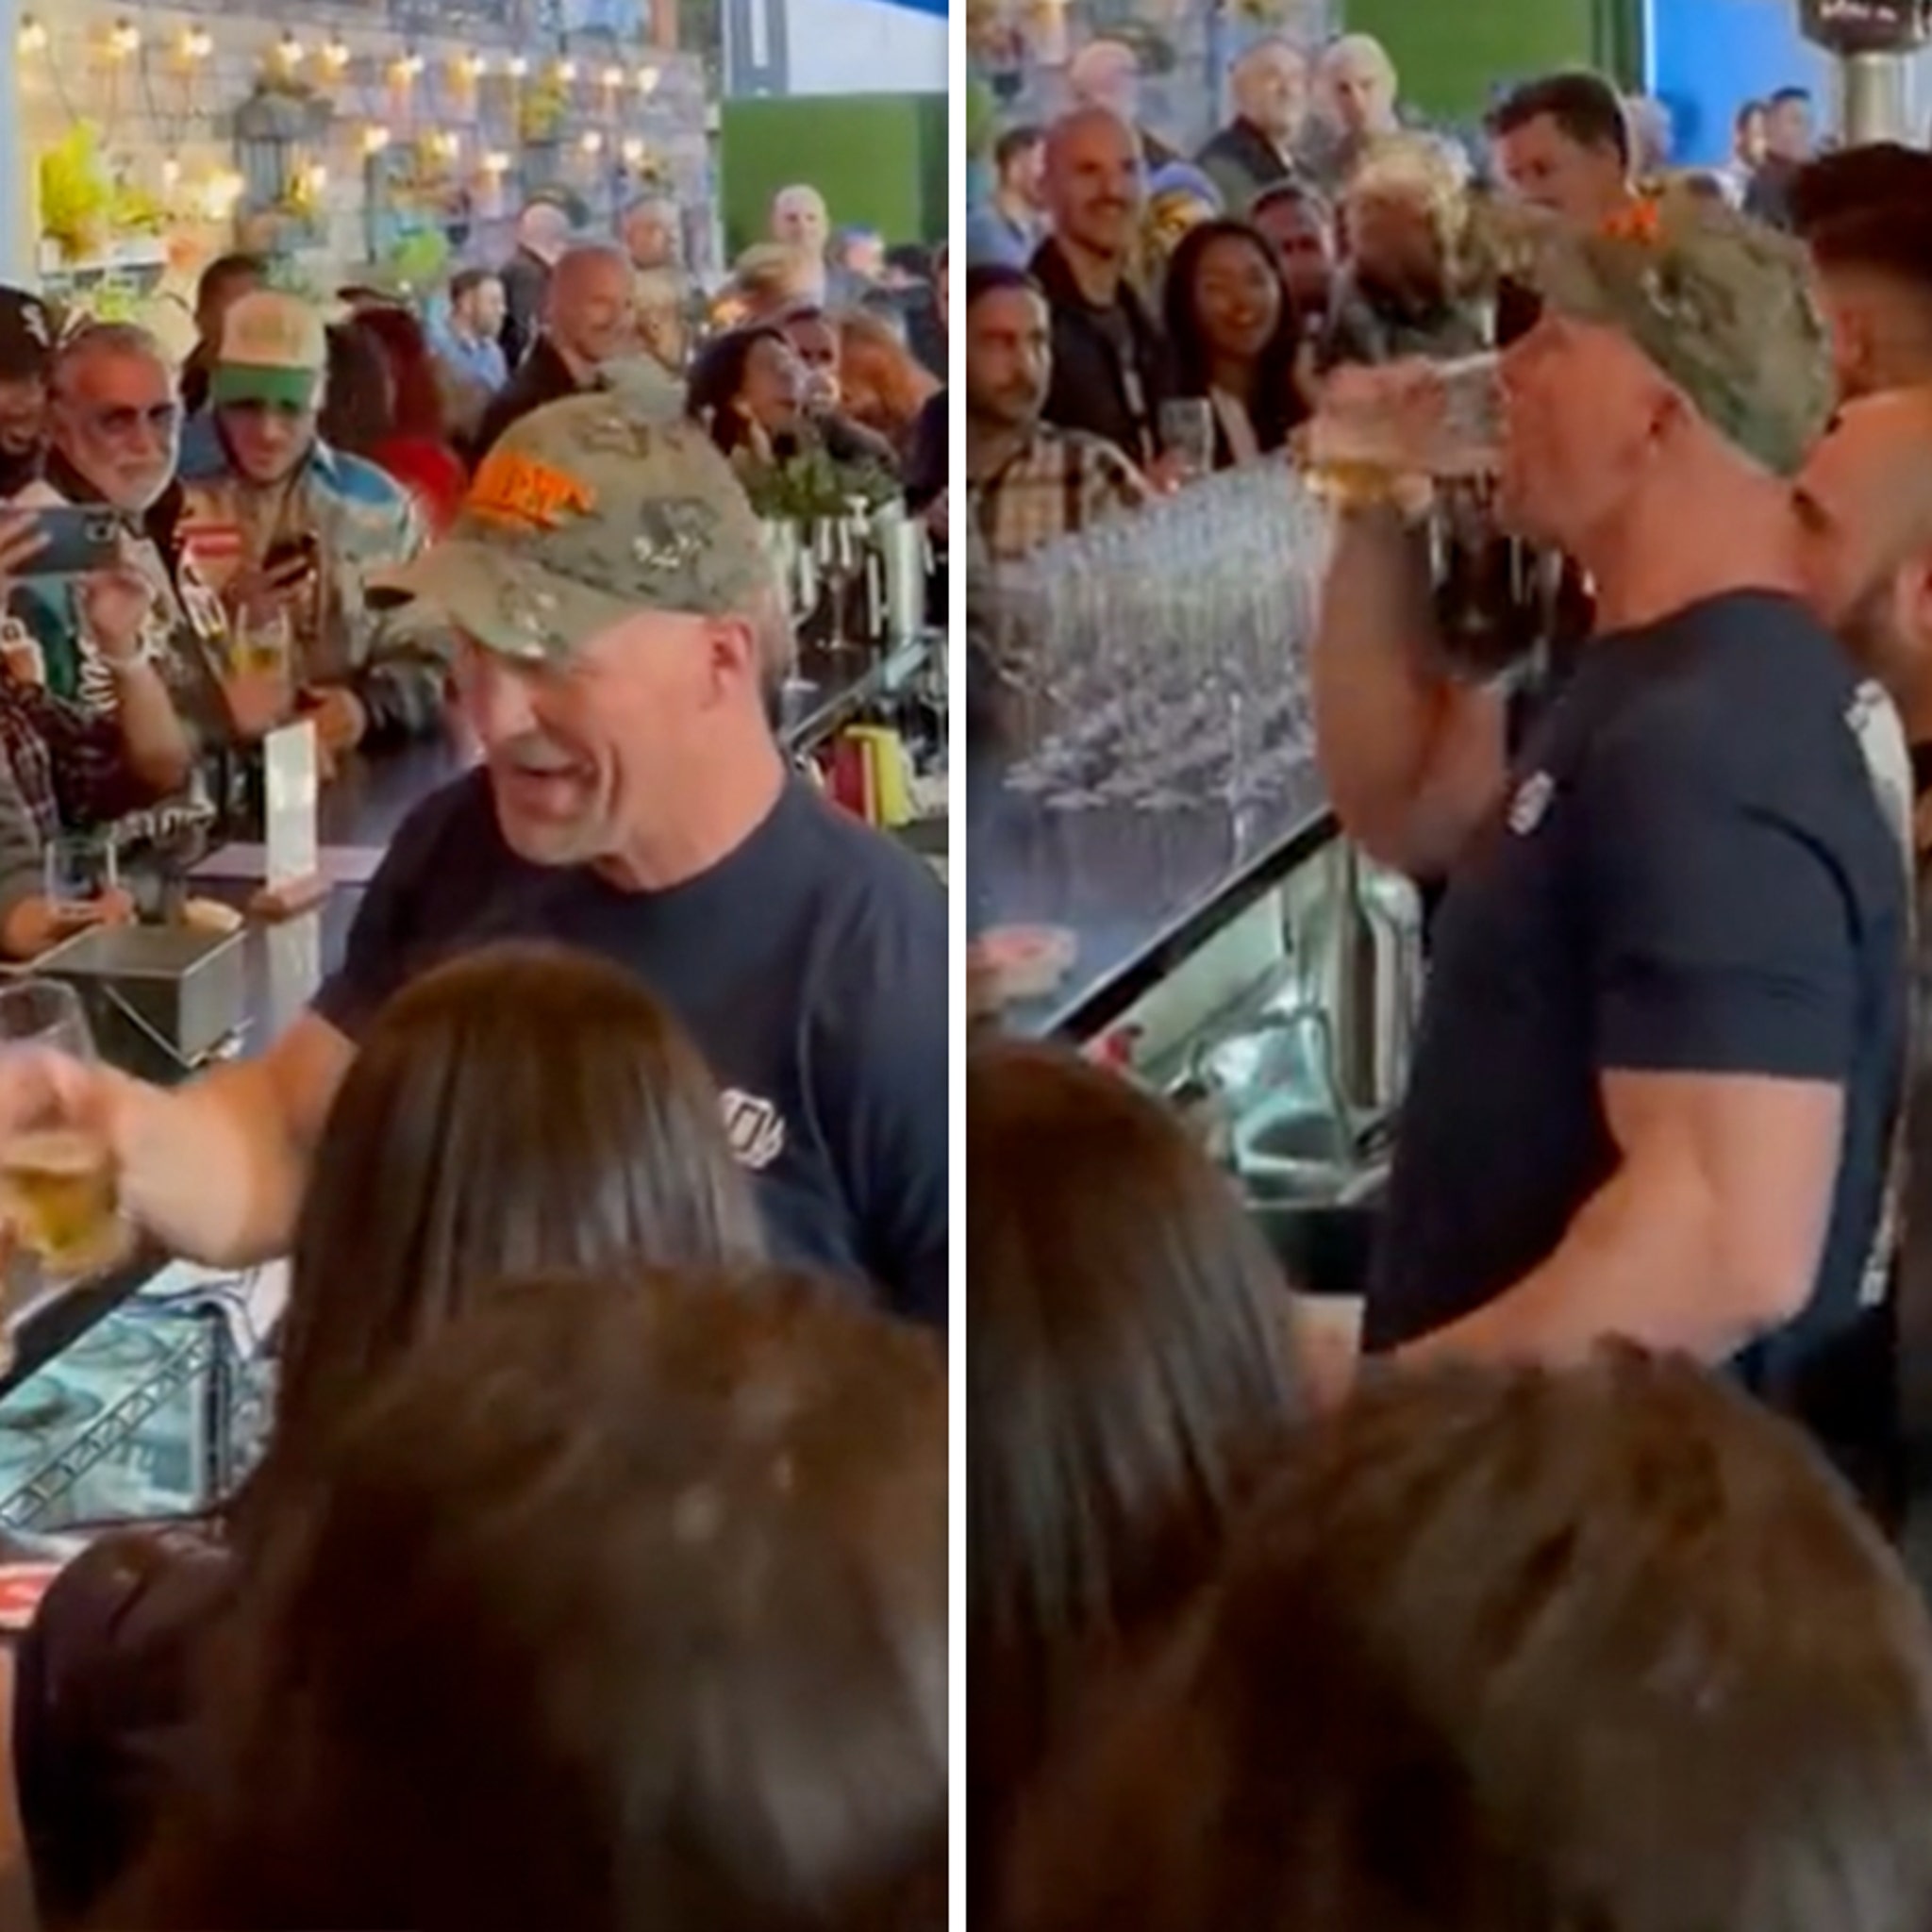 Stone Cold' Steve Austin Drinks Beers W/ Fans on 'Austin 3:16' Day